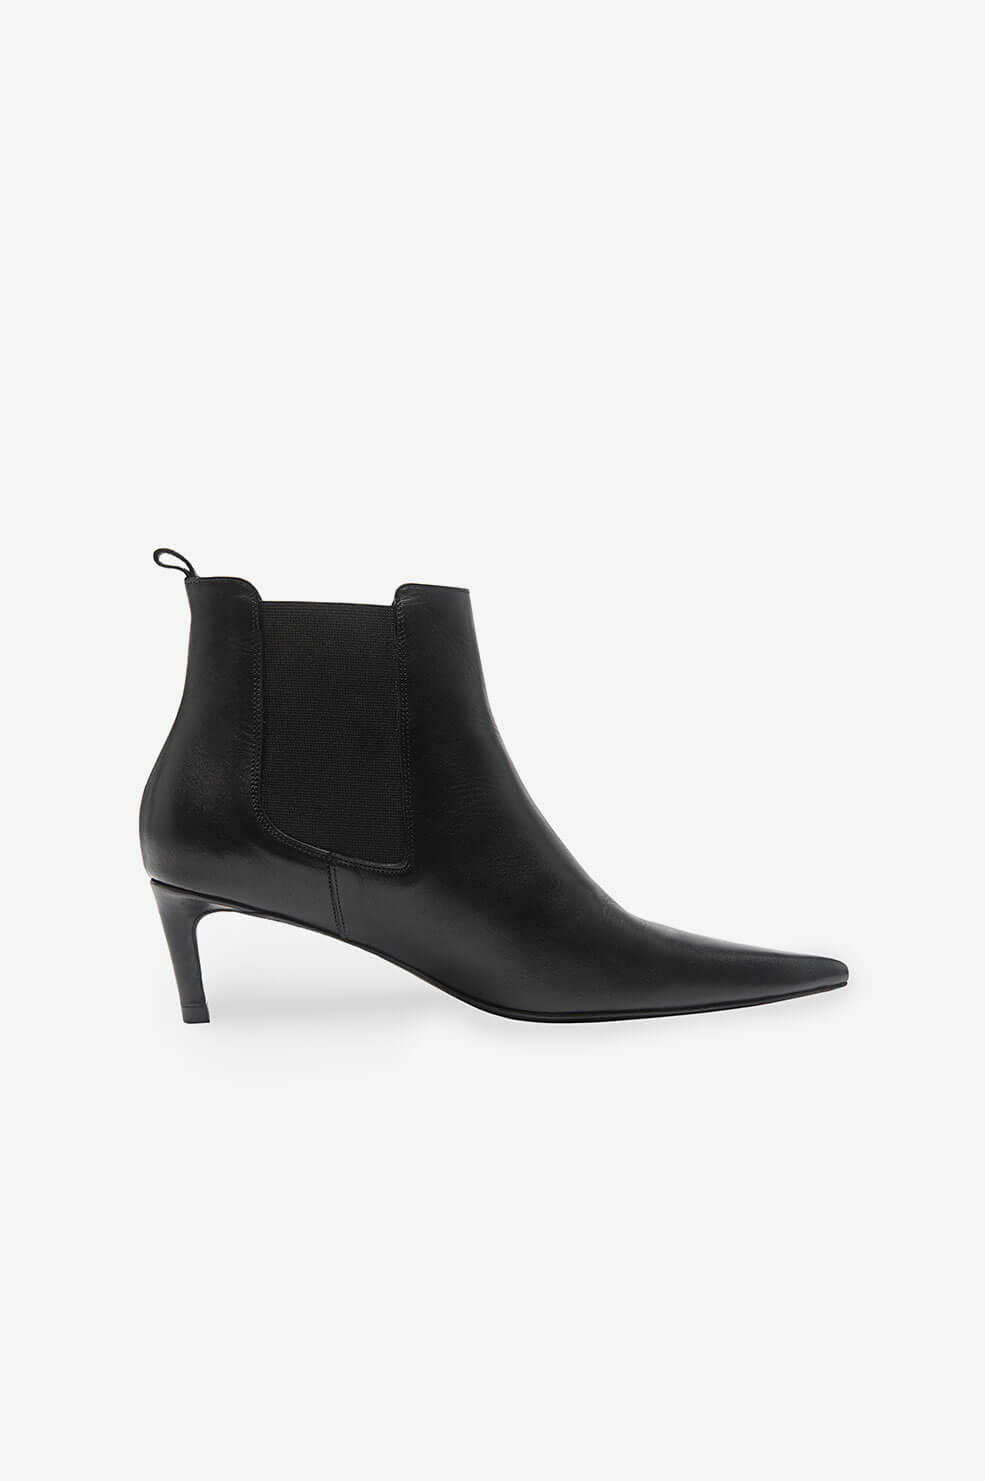 Anine Bing Stevie Boots In Black Leather | ModeSens